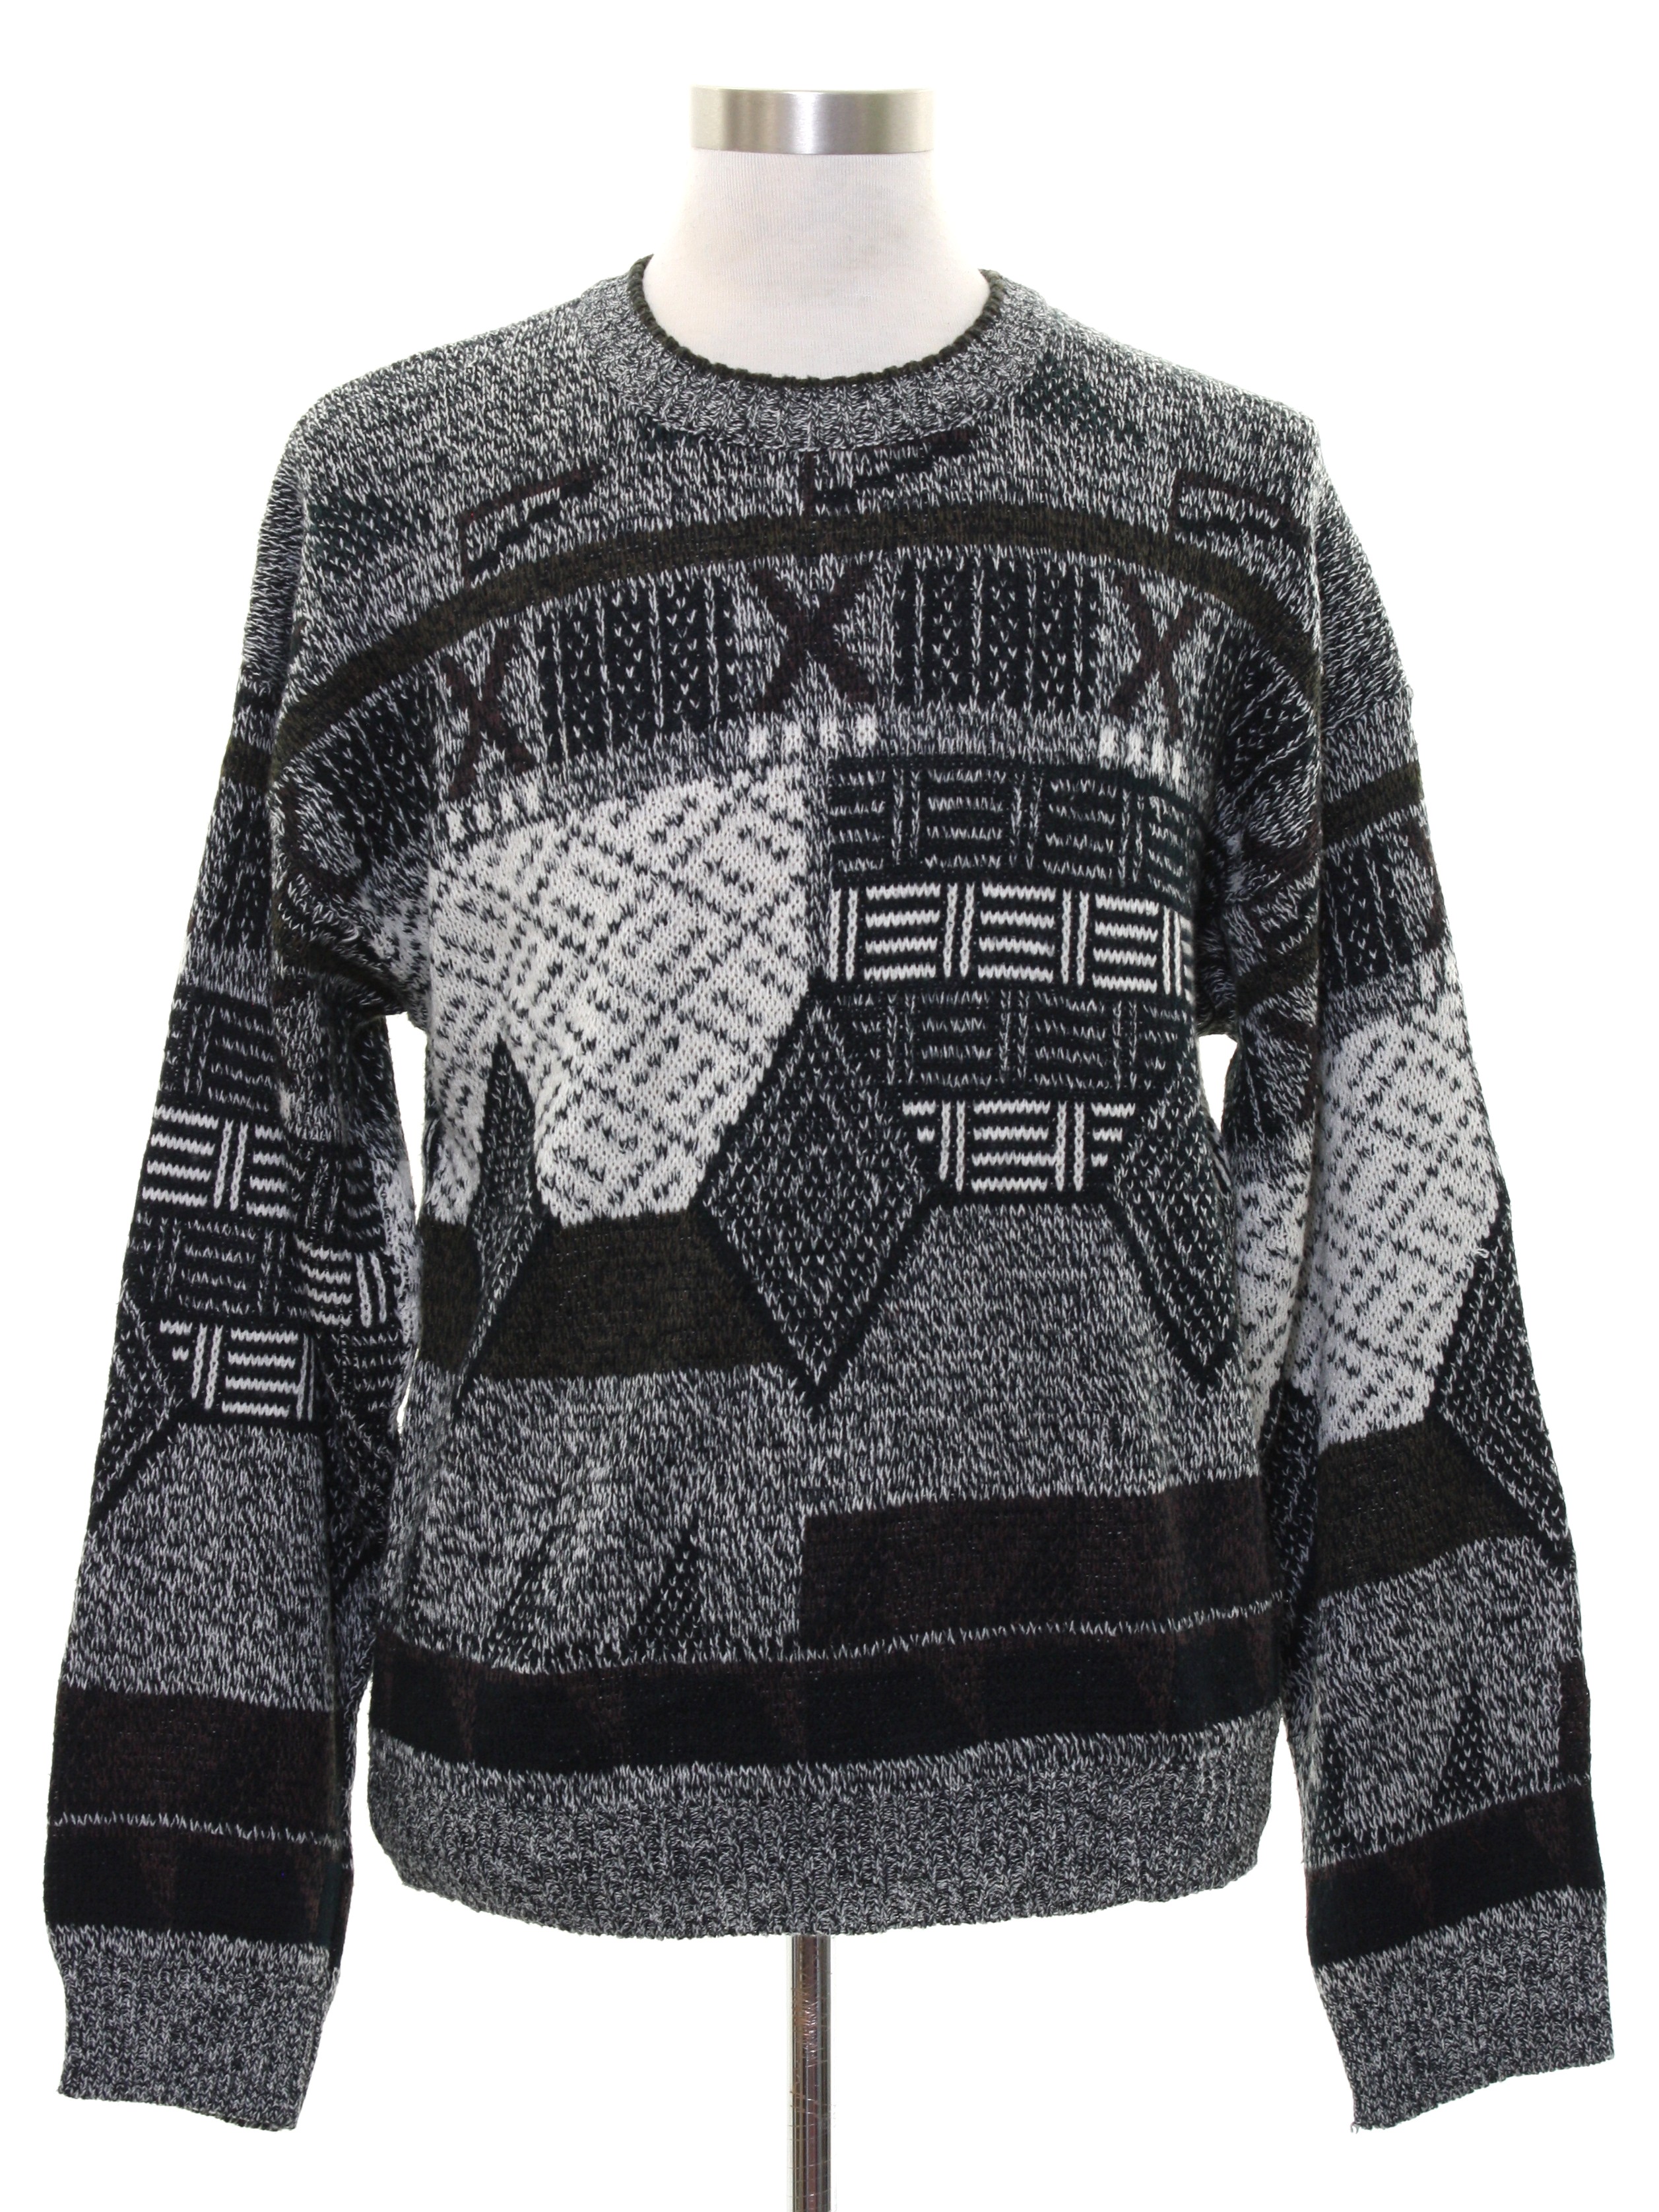 Retro 80s Sweater (Expressions) : 80s -Expressions- Mens abstract ...